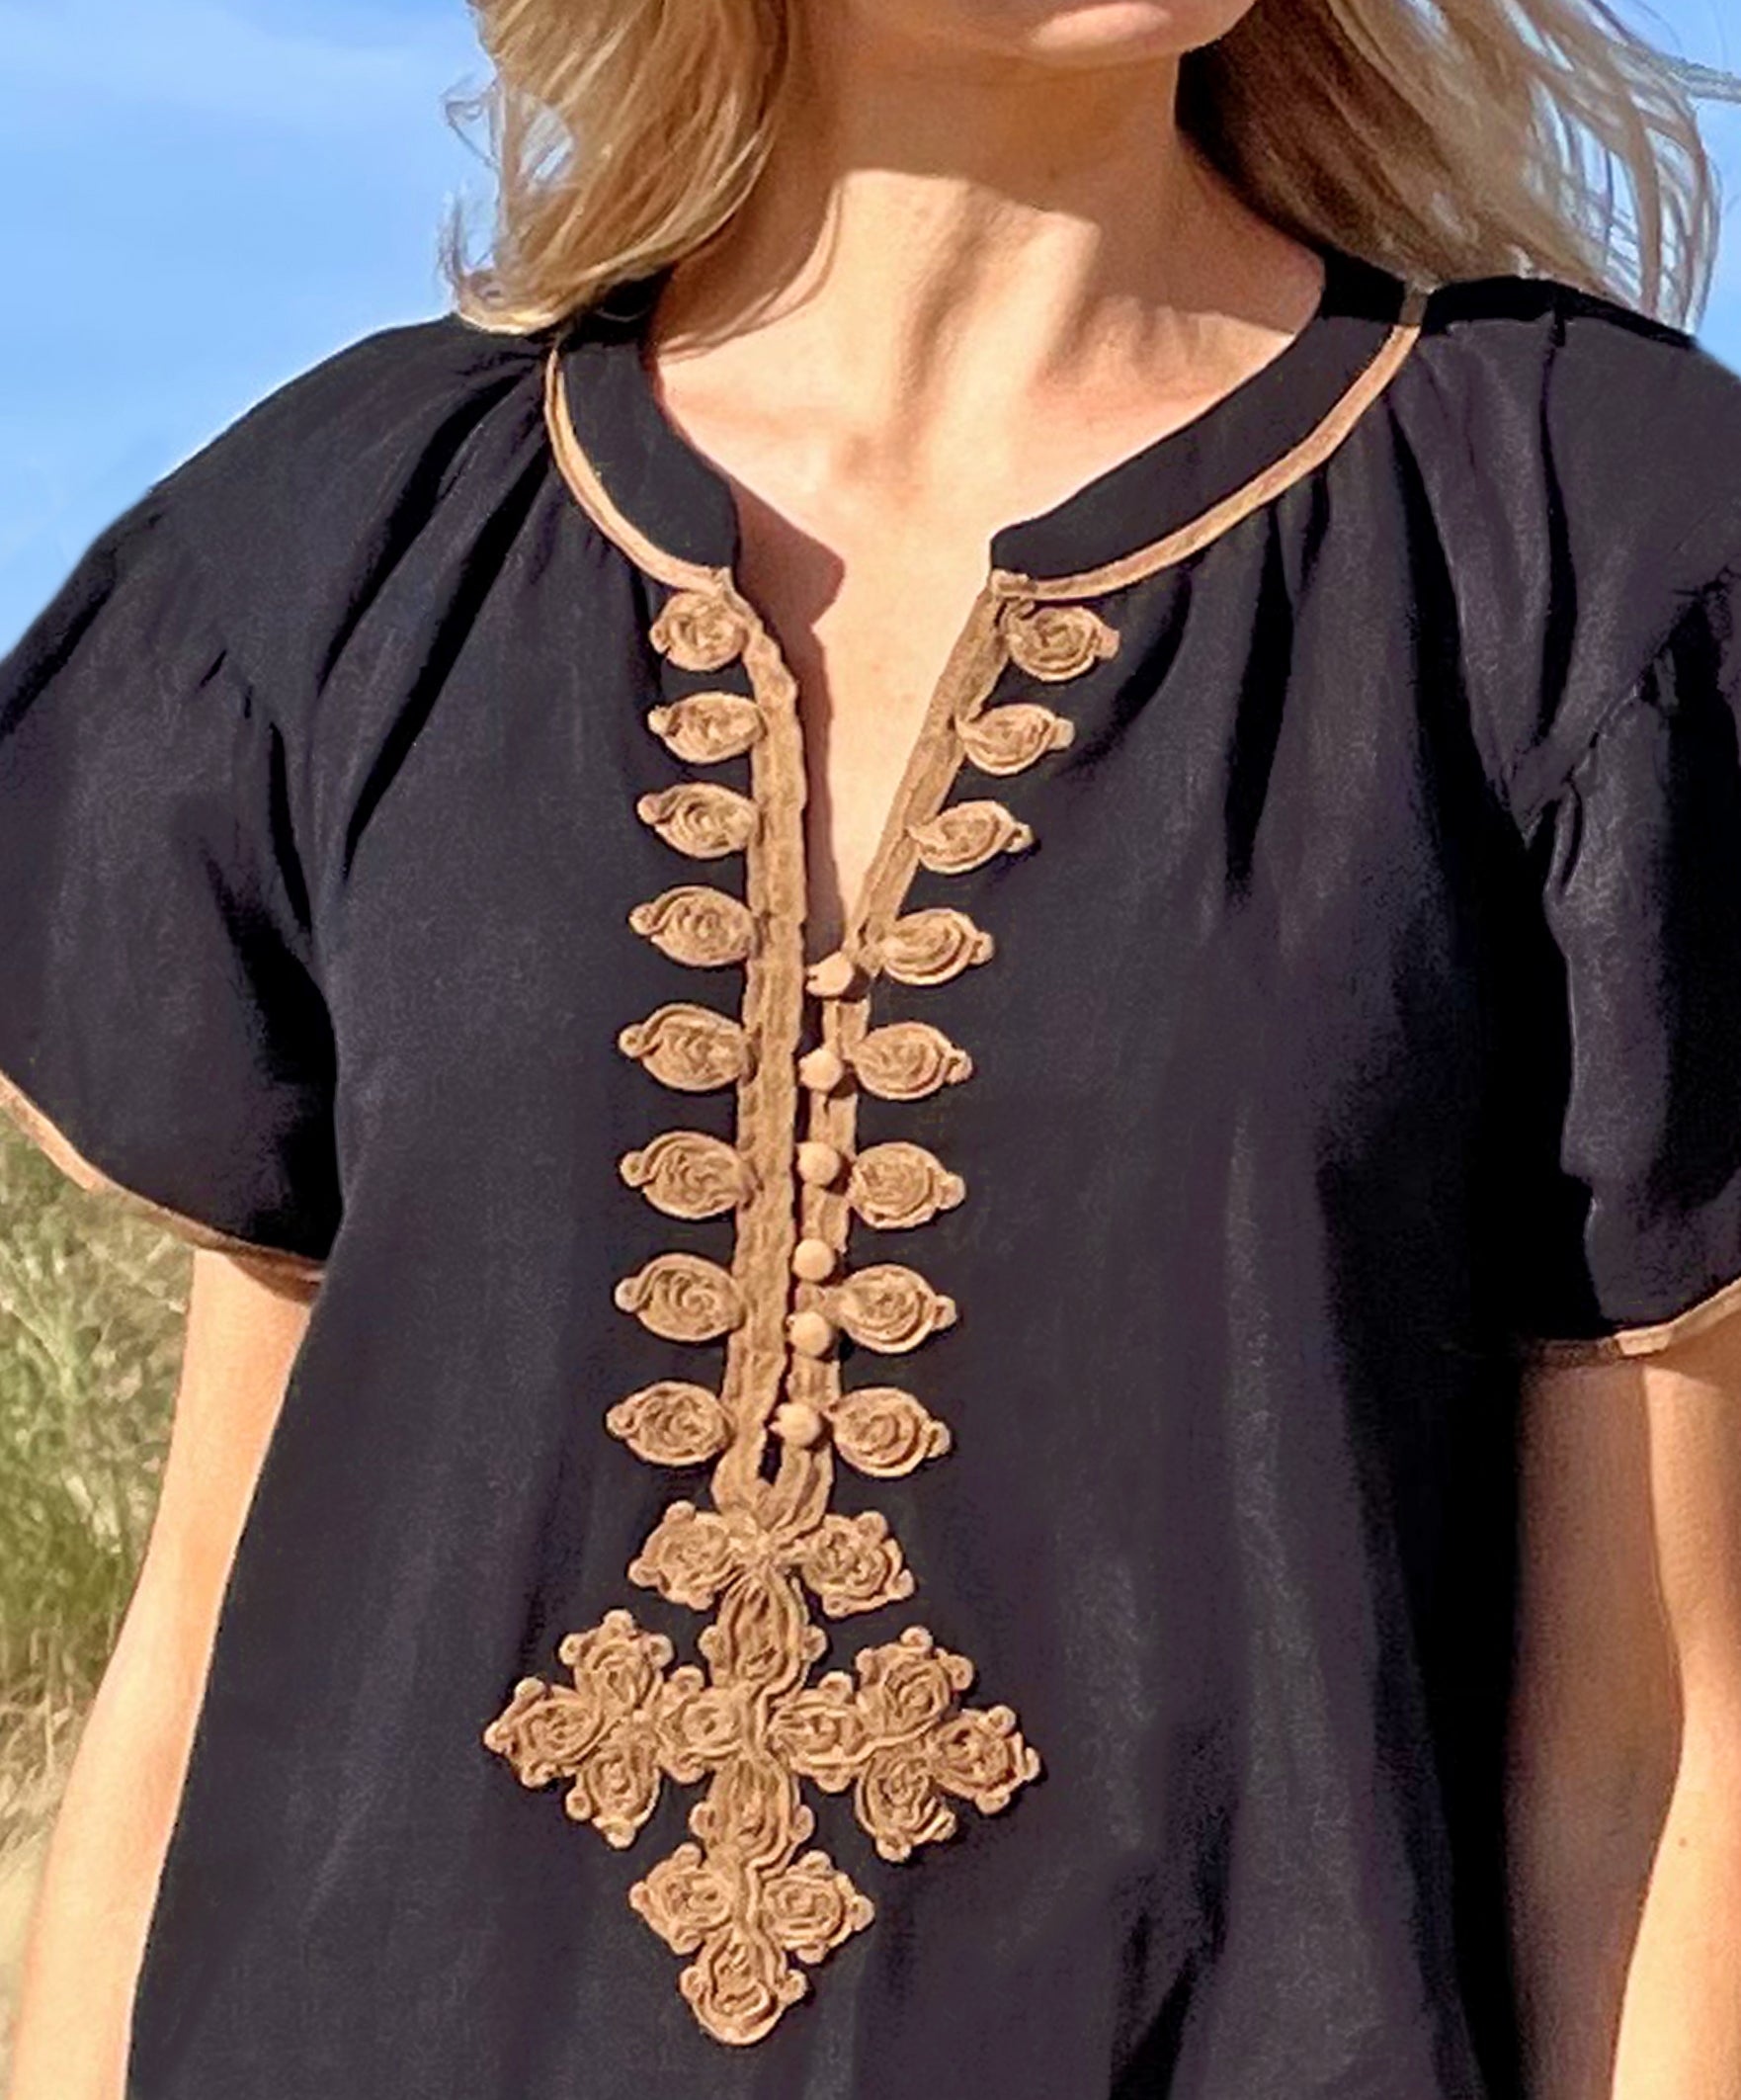 The passementerie embroidery details of the Rose and Rose Imperia top in black cotton.